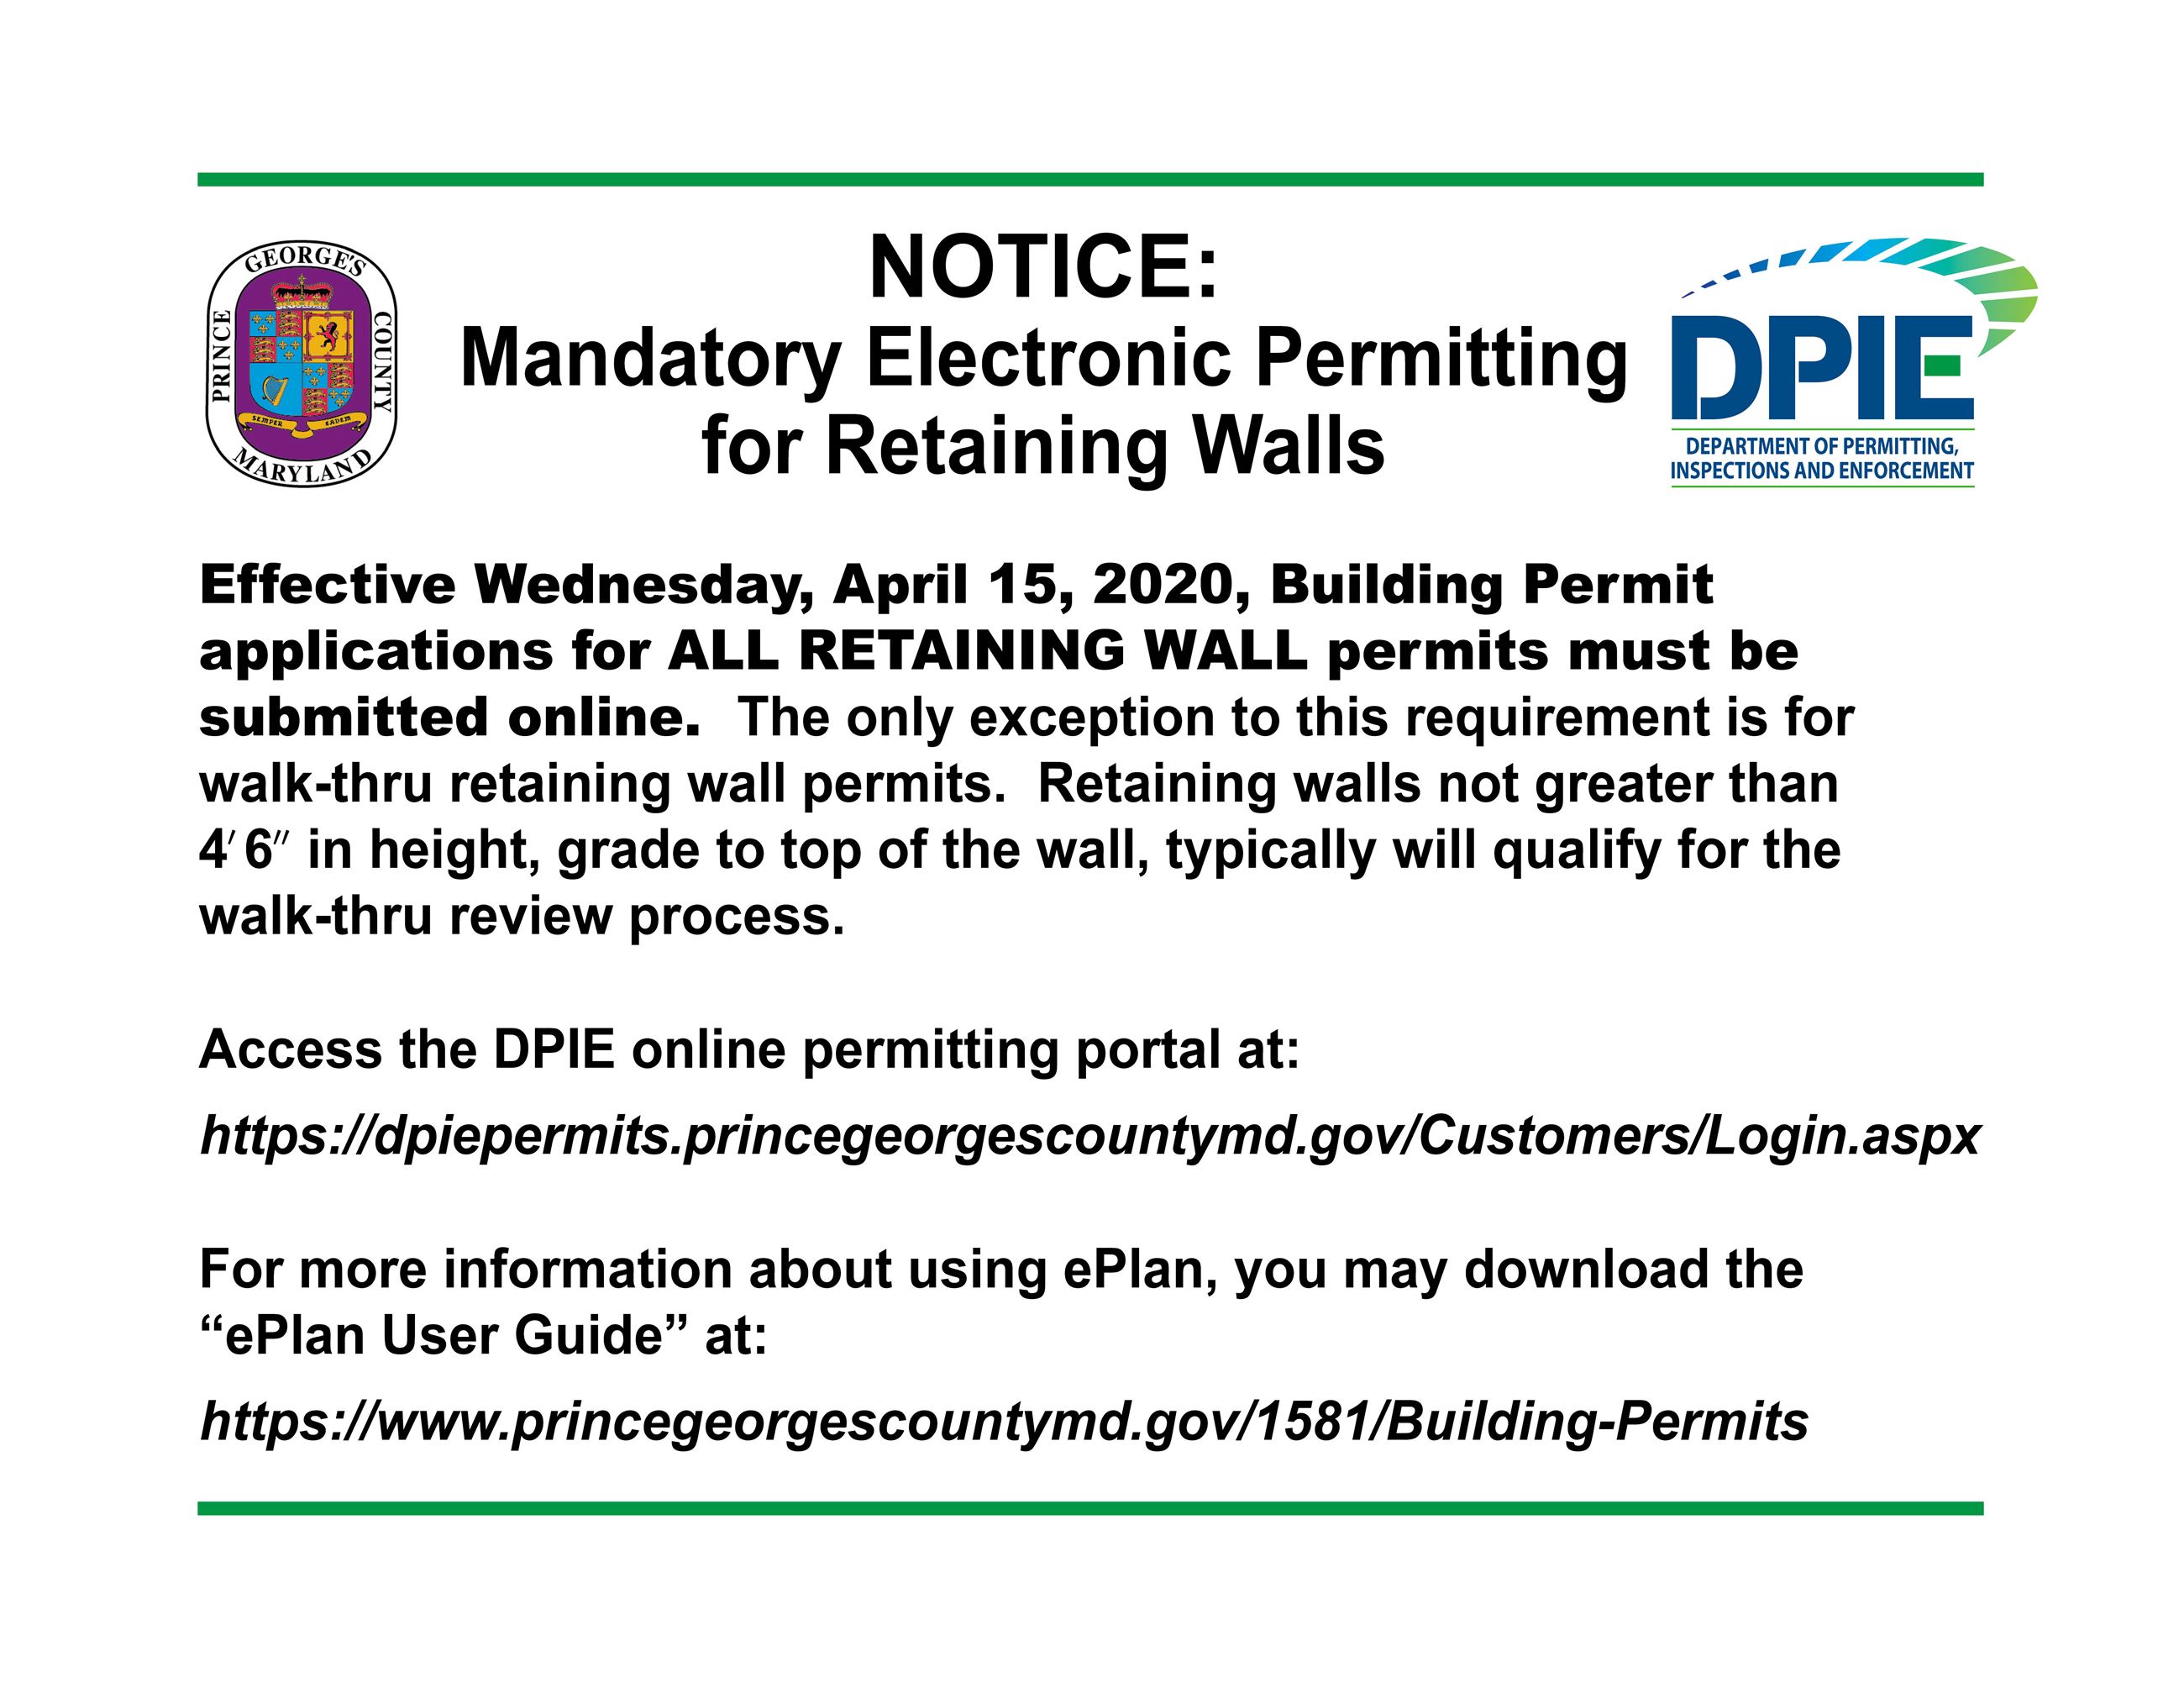 Mandatory Retaining Wall Notice for online permit applications